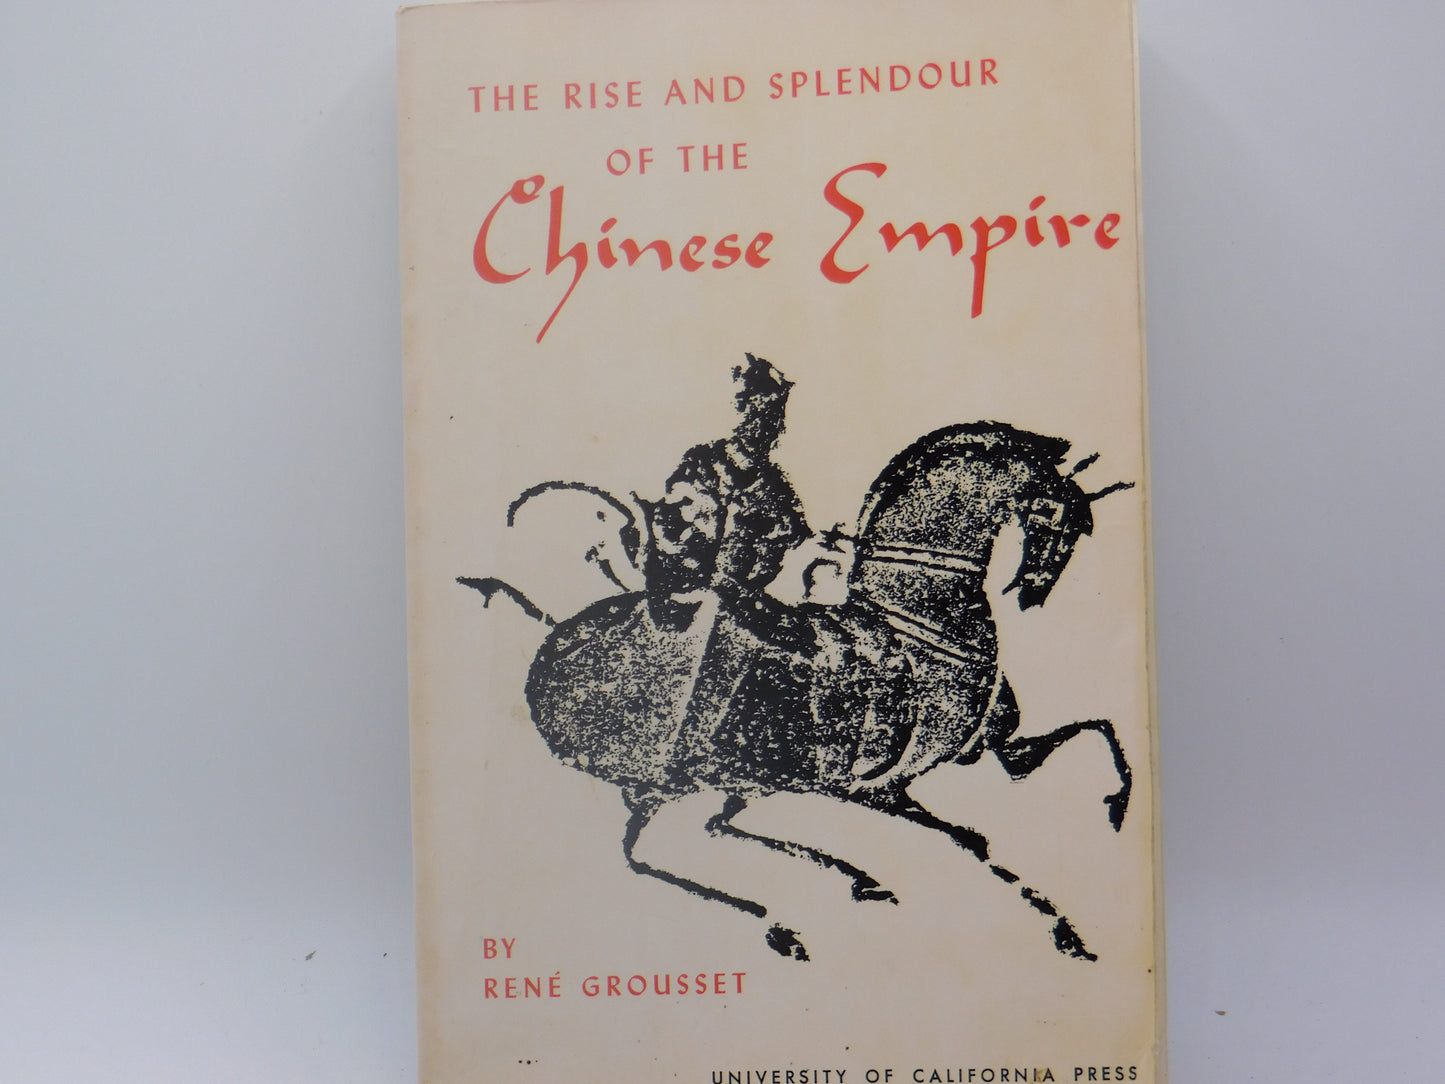 The Rise And Splendour Of The Chinese Empire by Rene Grousset